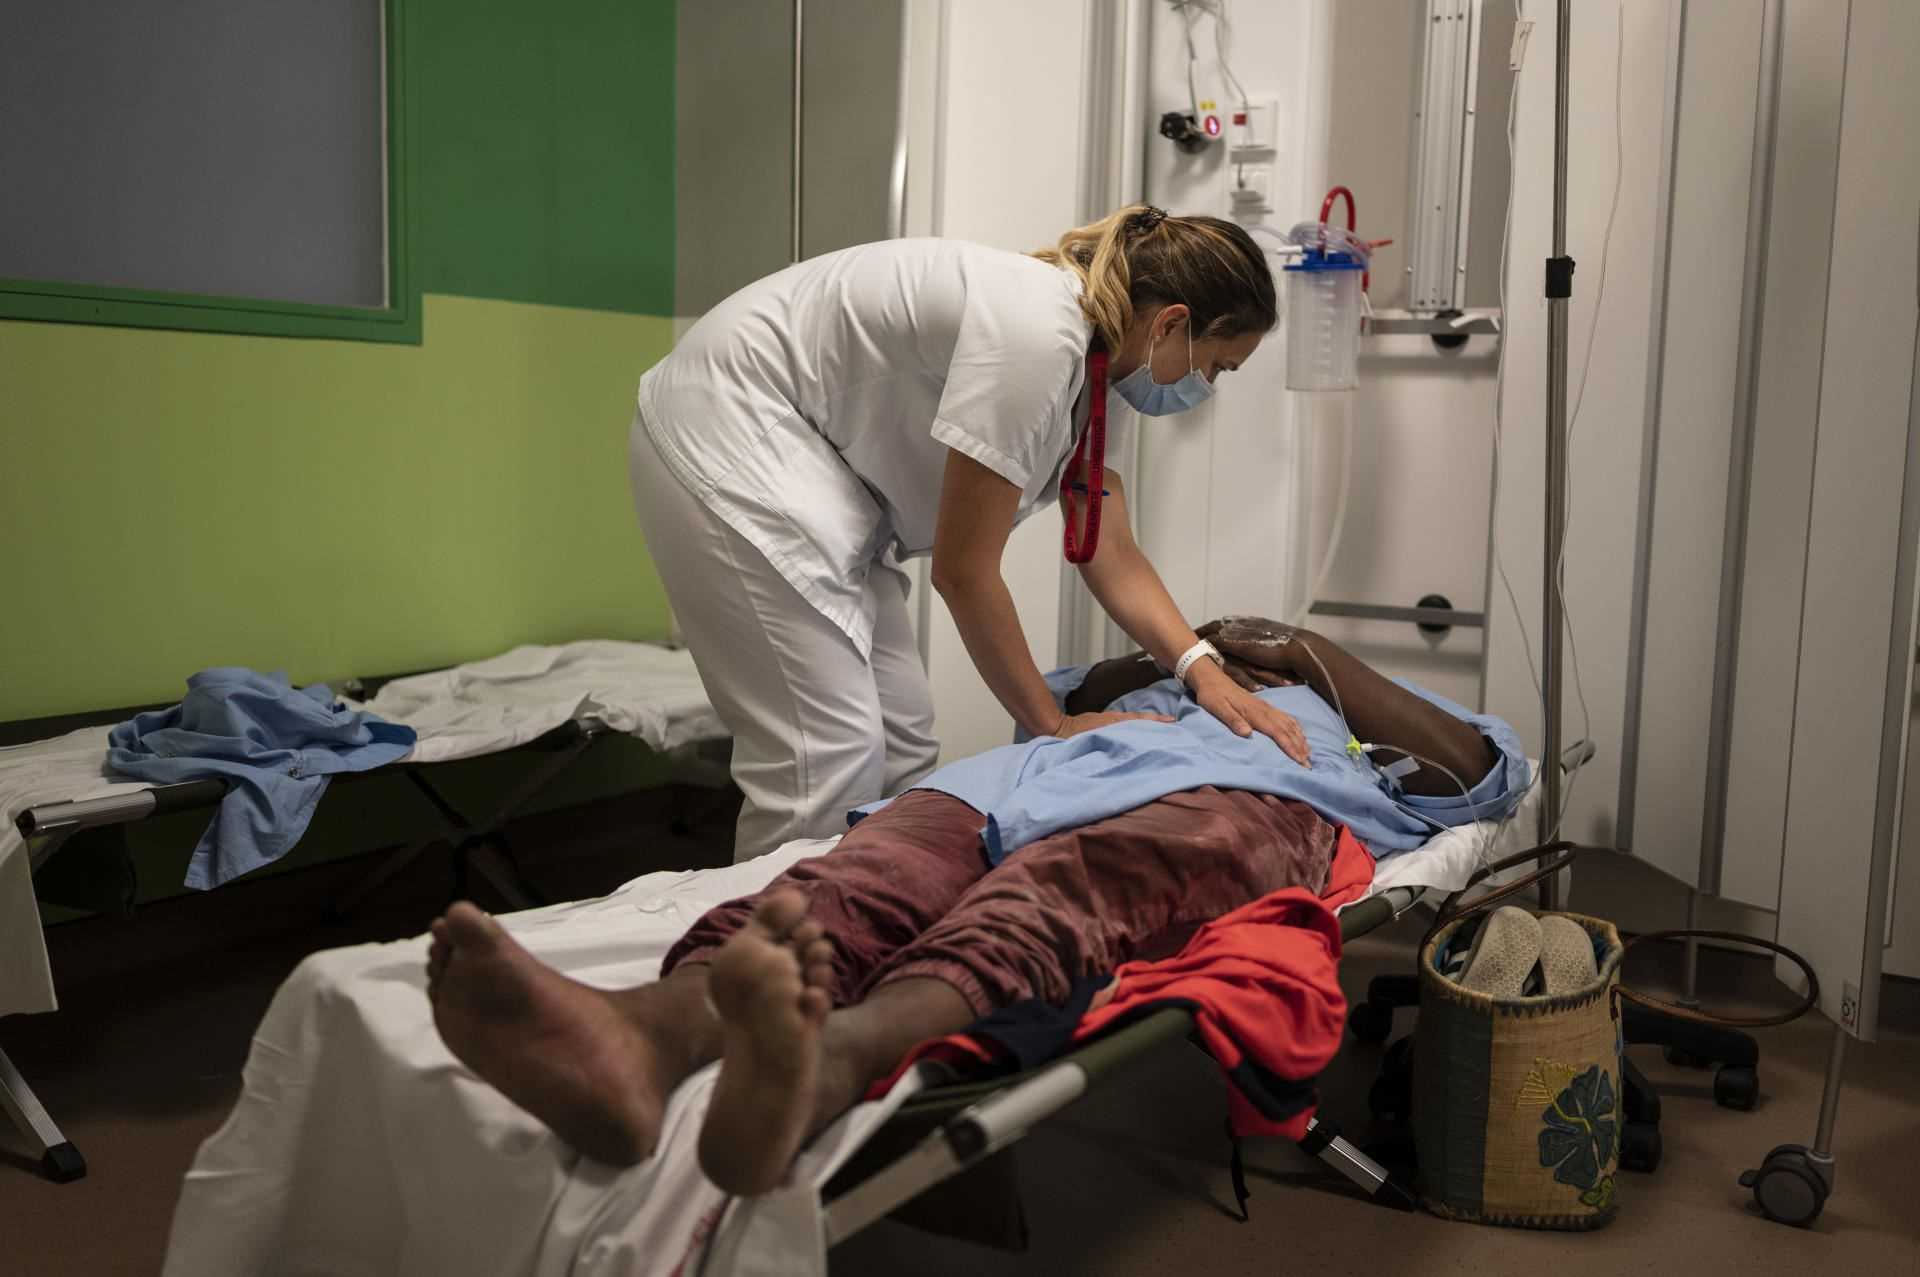 One of the emergency doctors examines one of the patients installed on the emergency stretchers, the same type as those in the army.  CHOR, Saint-Paul, Reunion Island, May 25, 2021.